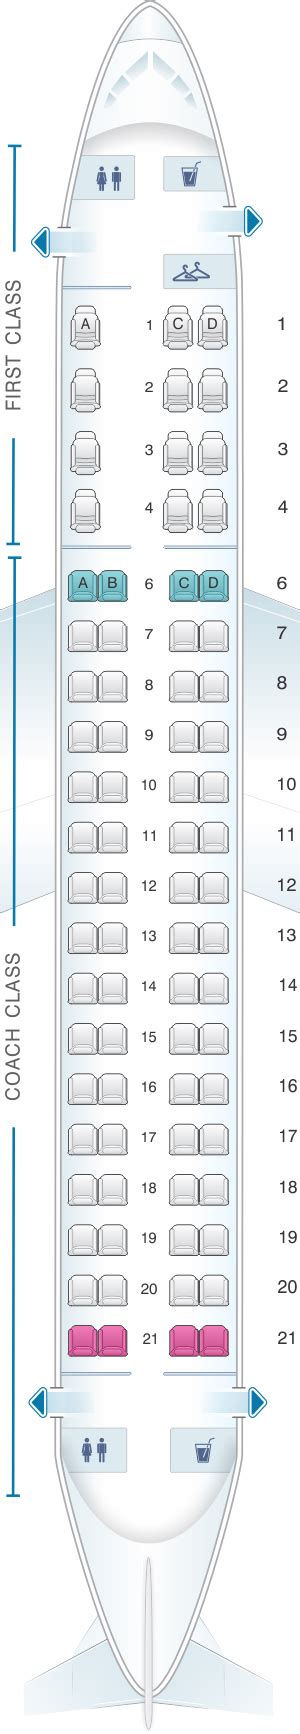 Seat Map Embraer 175